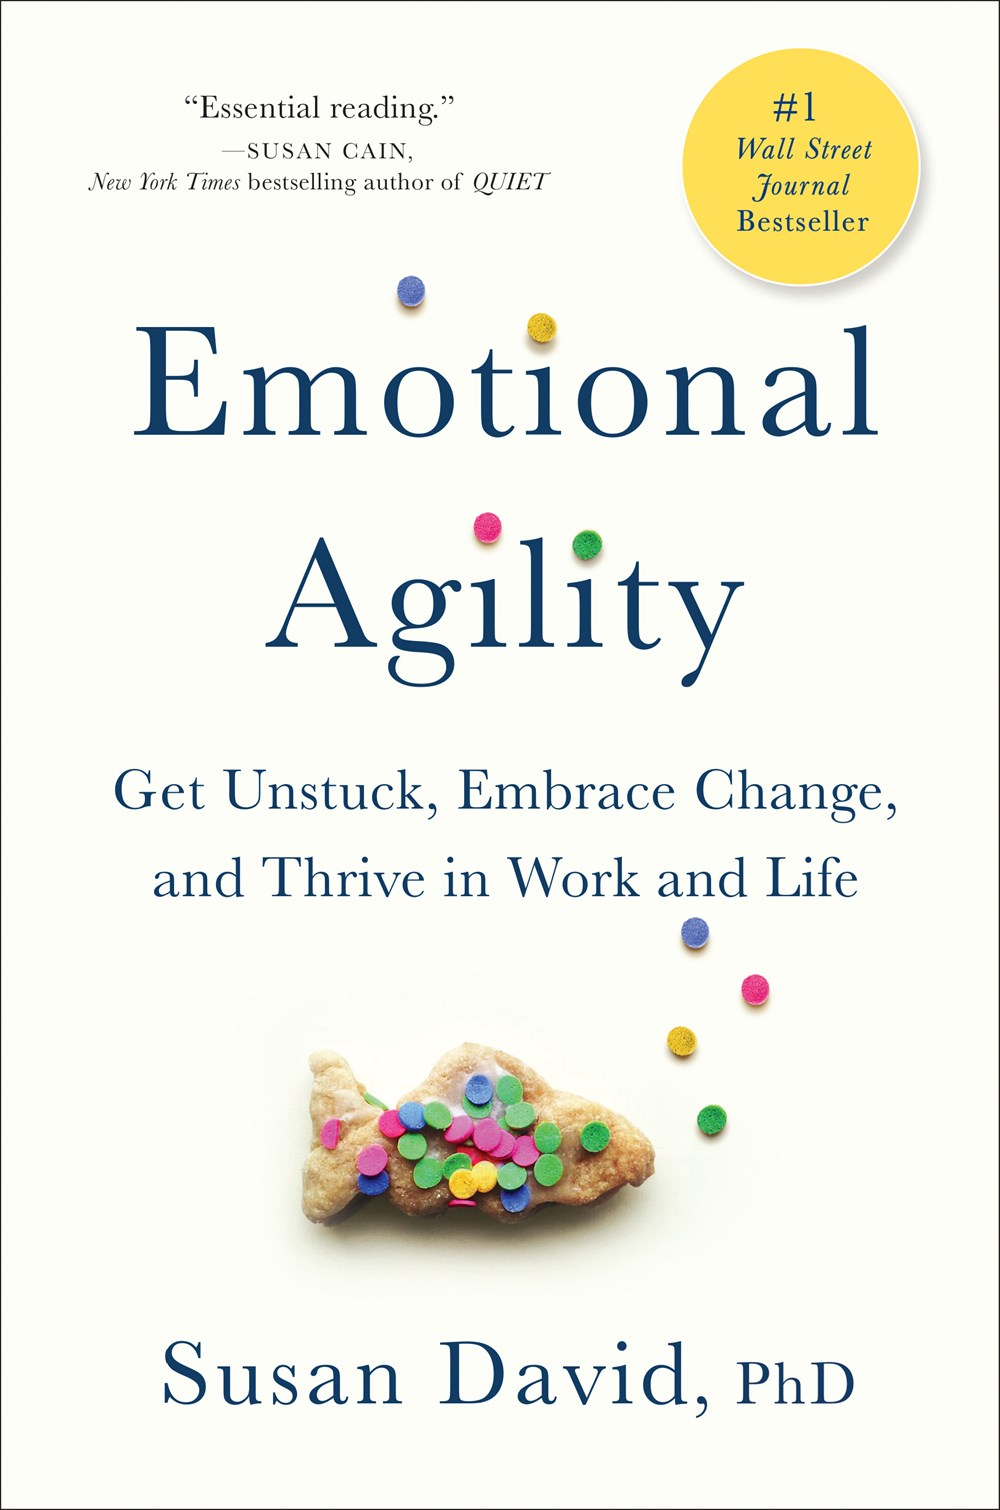  Emotional Agility: Get Unstuck, Embrace Change, and Thrive in Work and Life